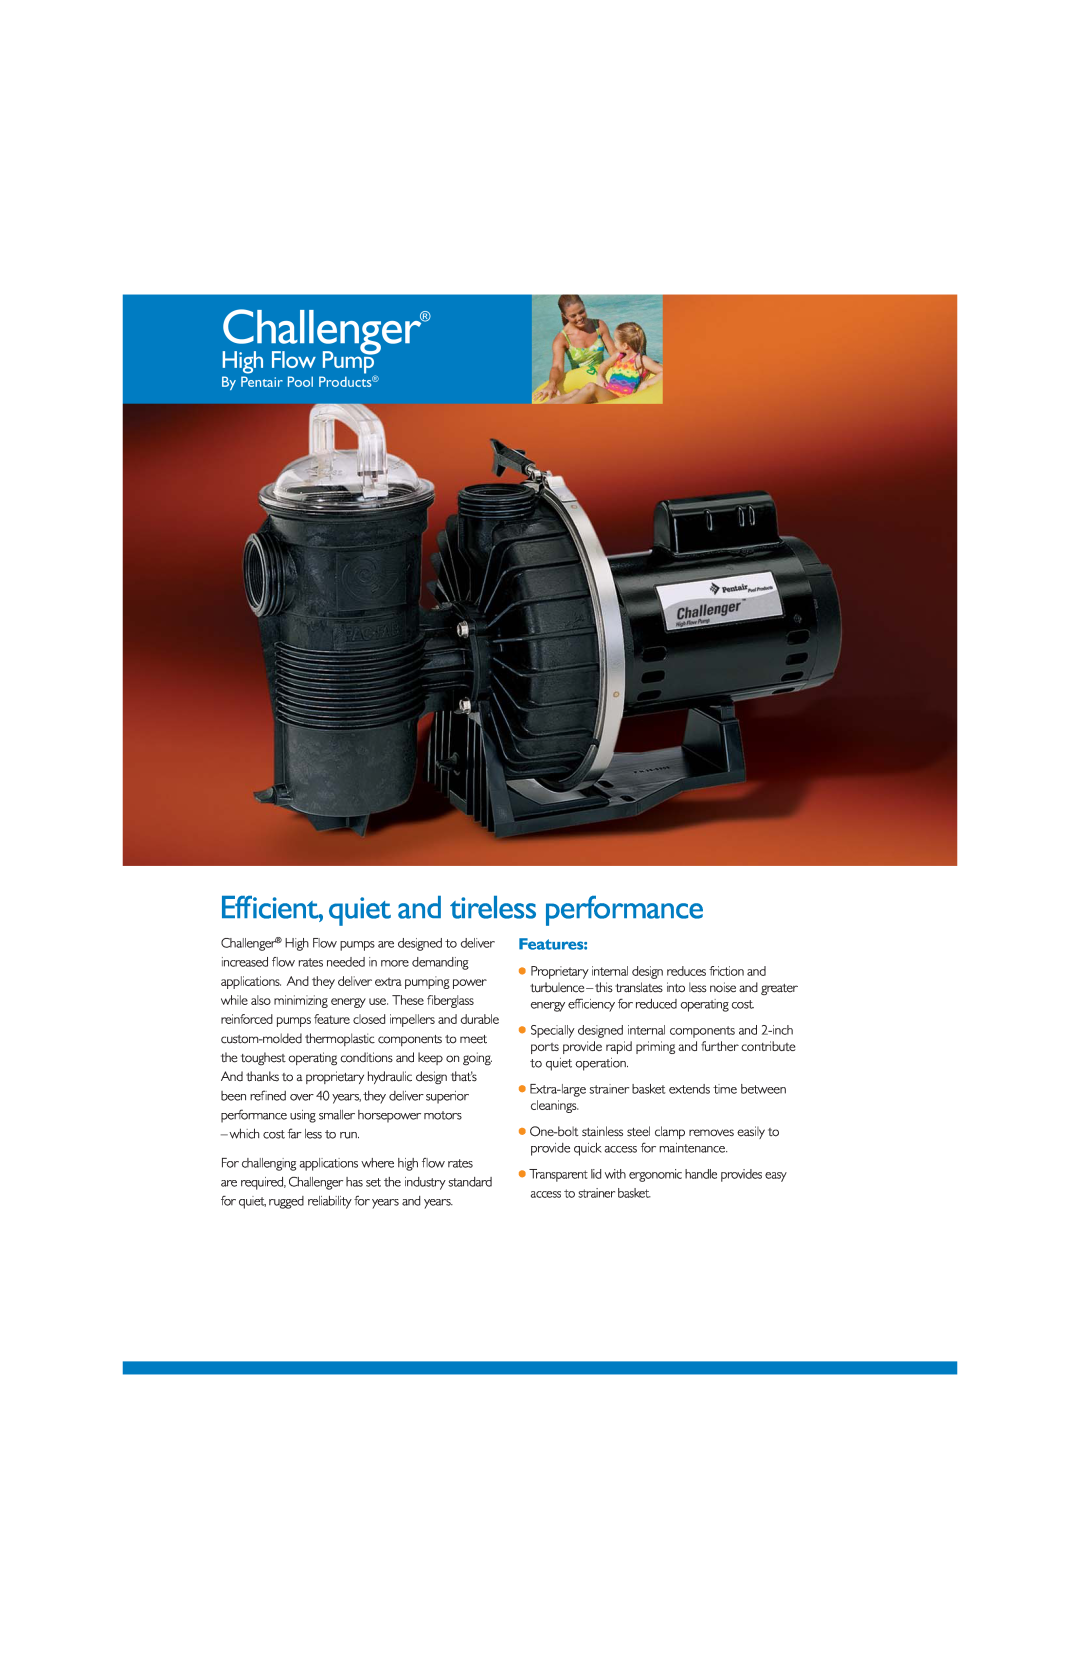 Pentair Challenger manual Efficient, quiet and tireless performance, High Flow Pump, Features, By Pentair Pool Products 